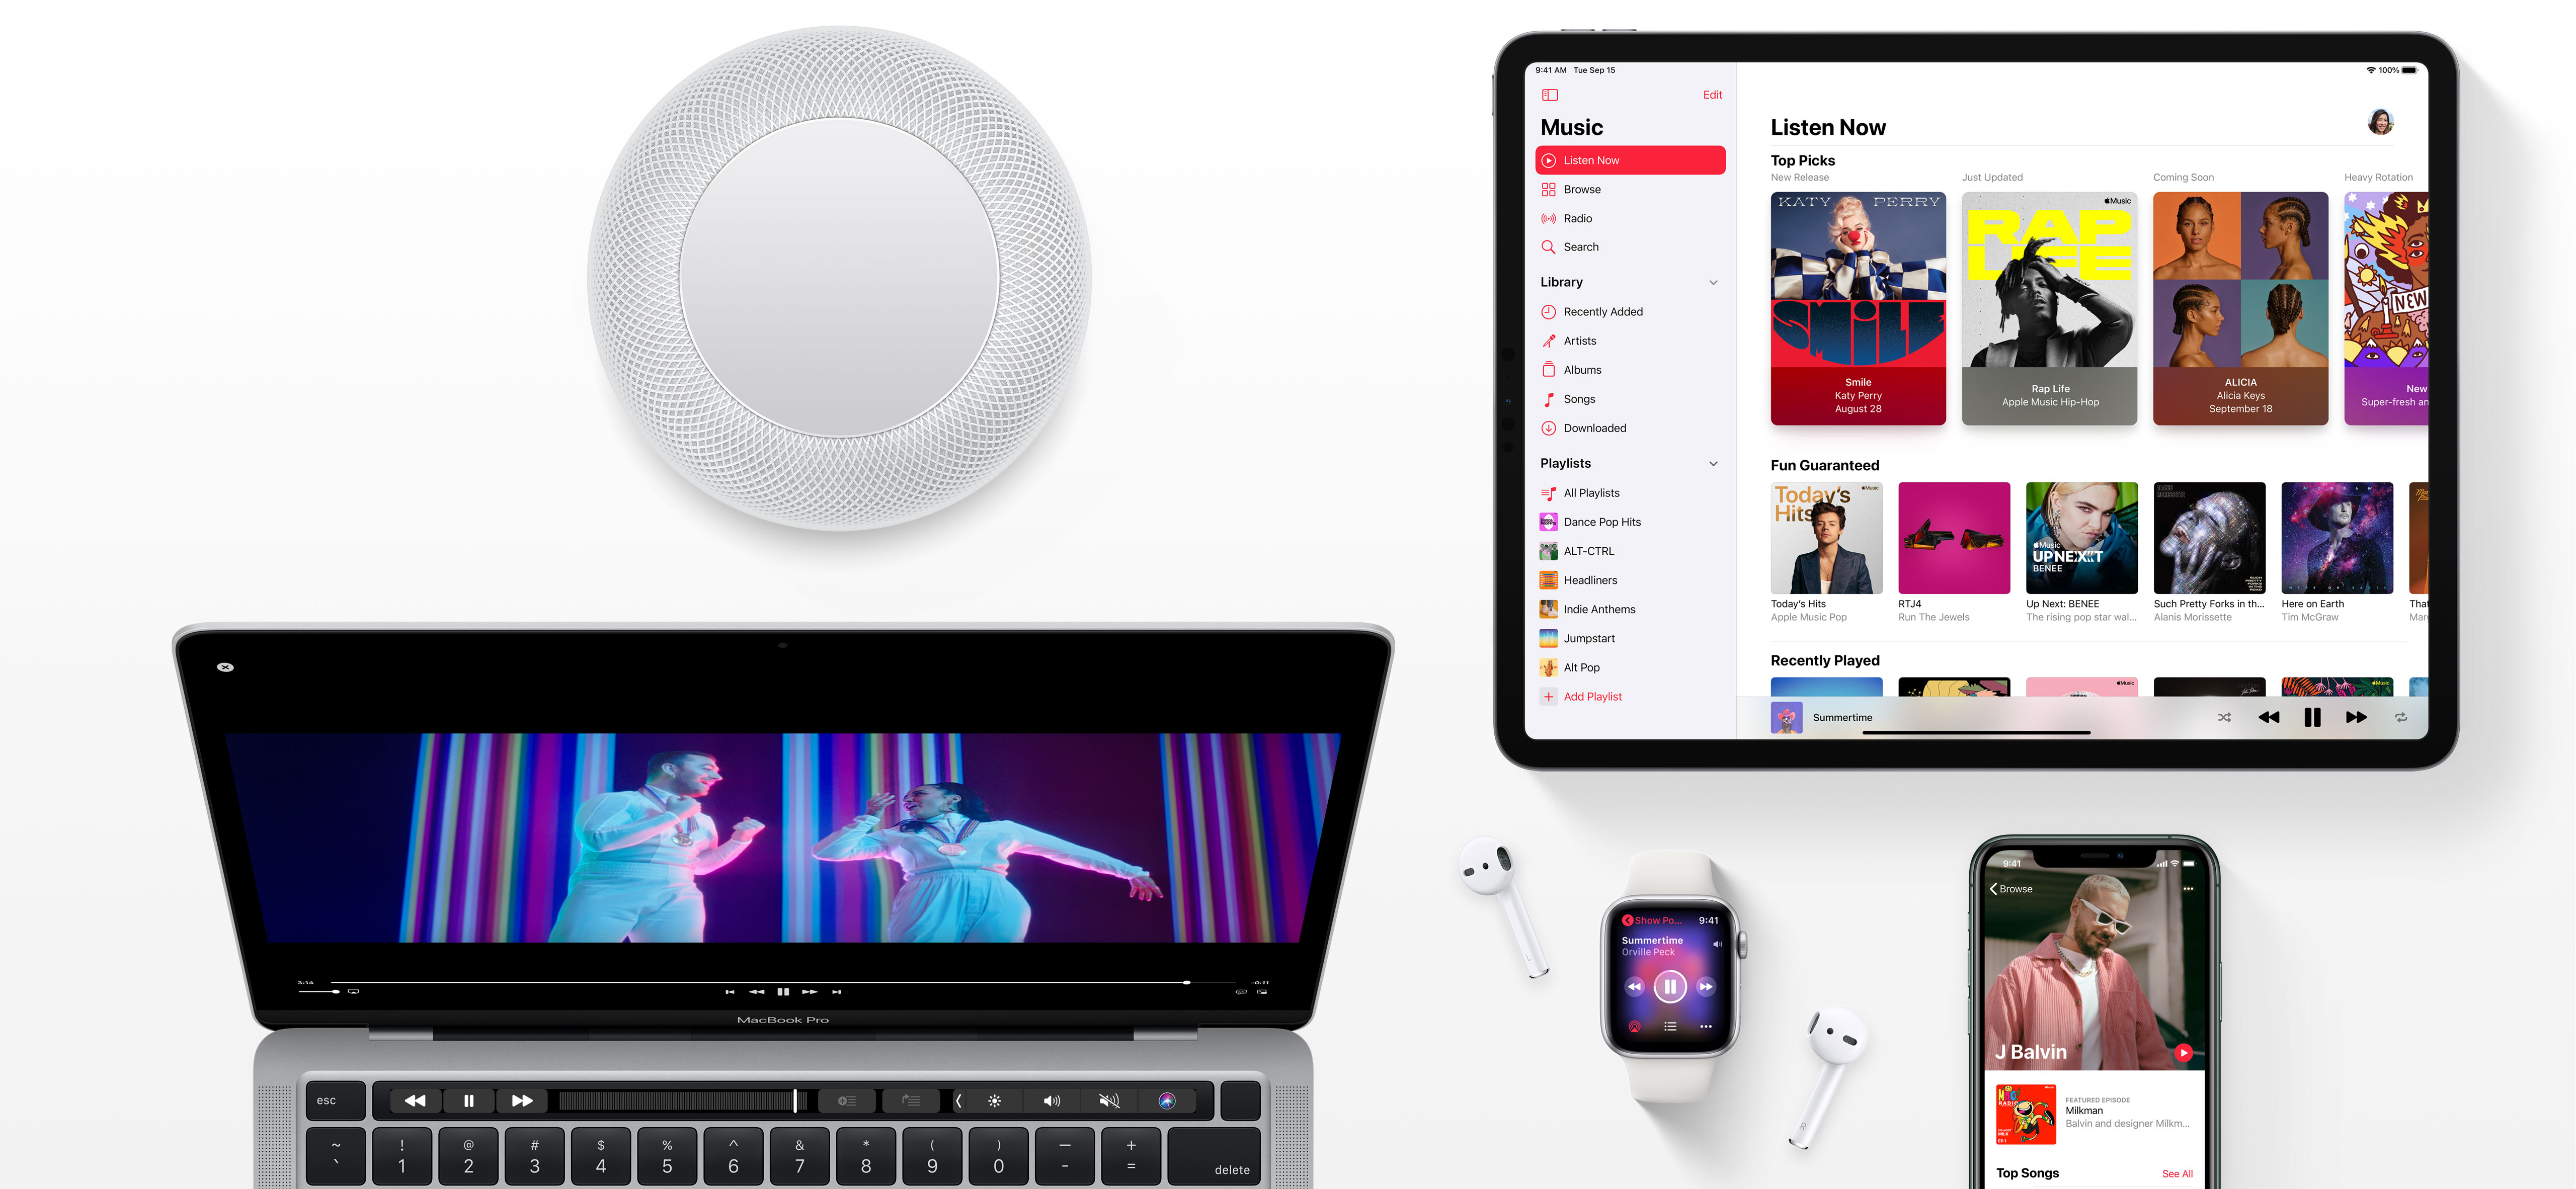 How to share songs, albums, artists and playlists on Apple Music